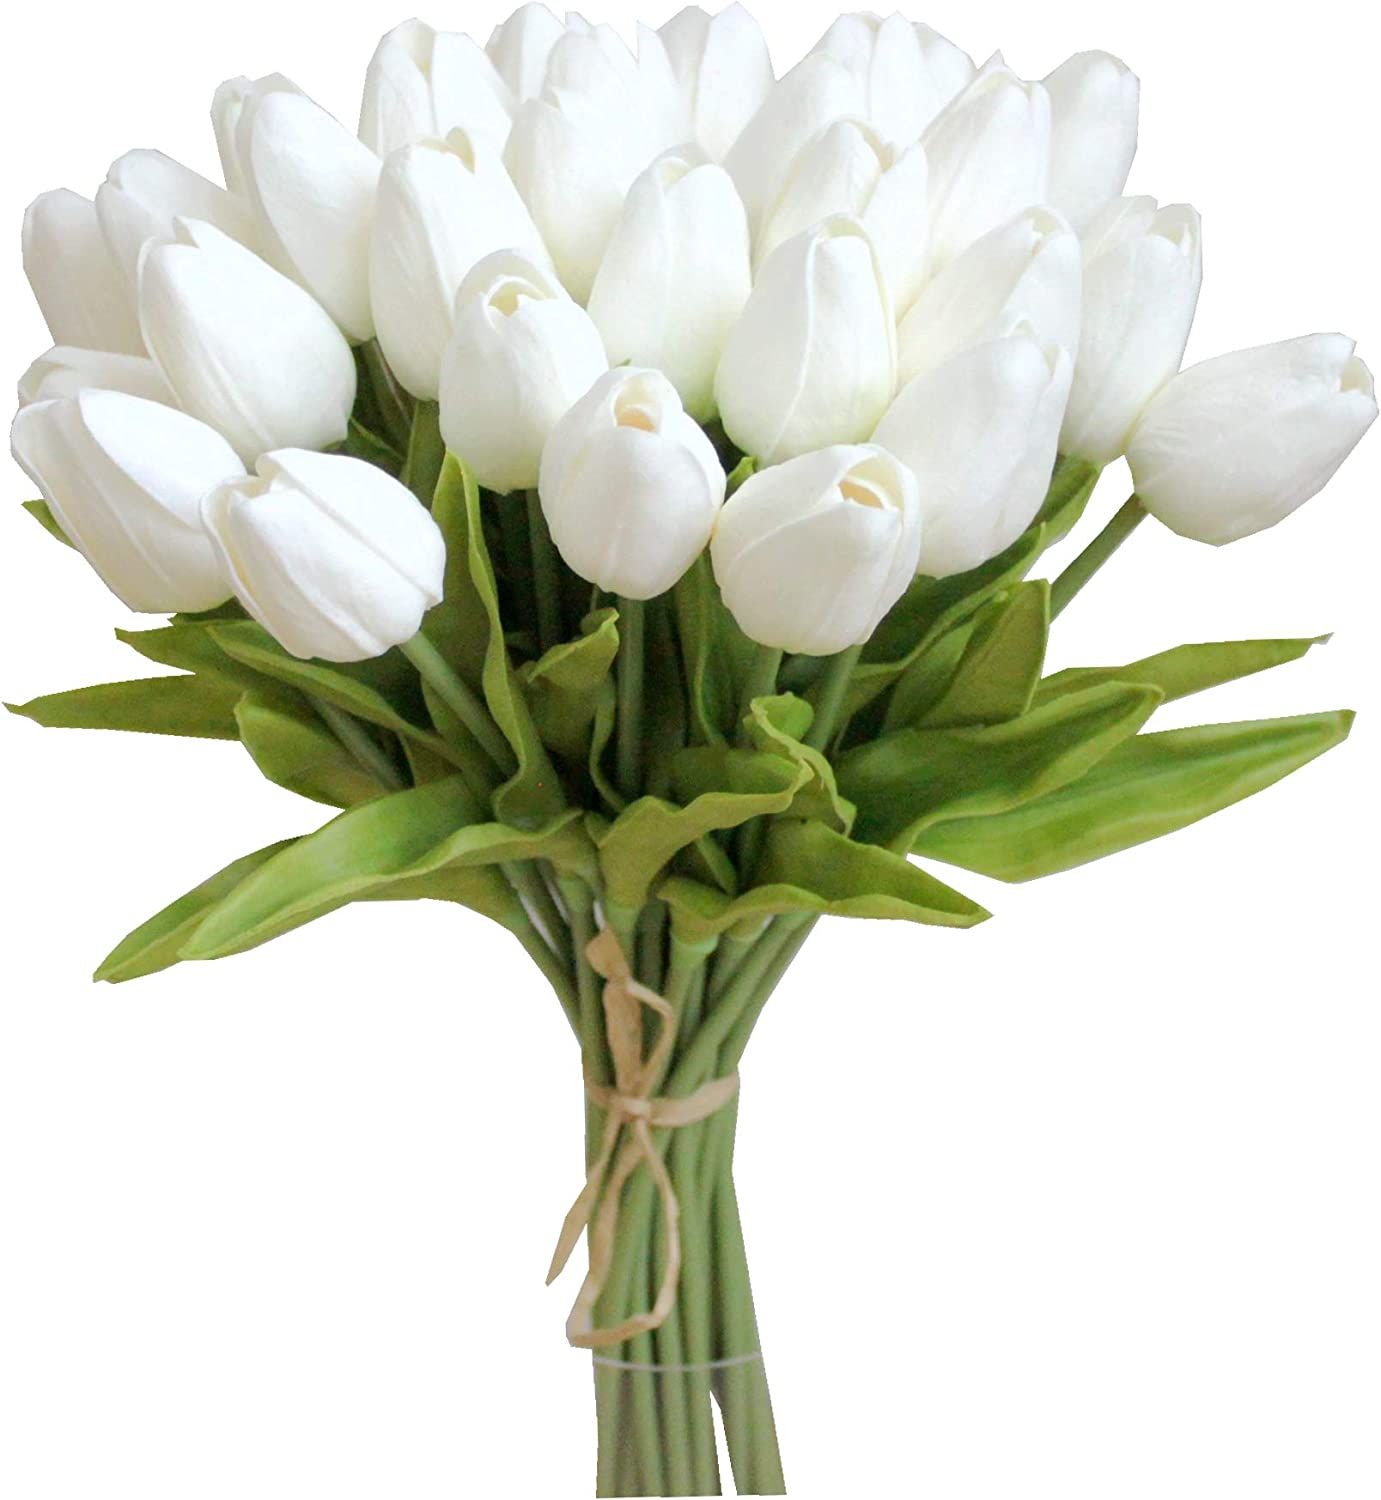 Mandy's 28pcs White Artificial Tulip Silk Flowers 13.5" for Home Kitchen Wedding Decorations | Amazon (US)